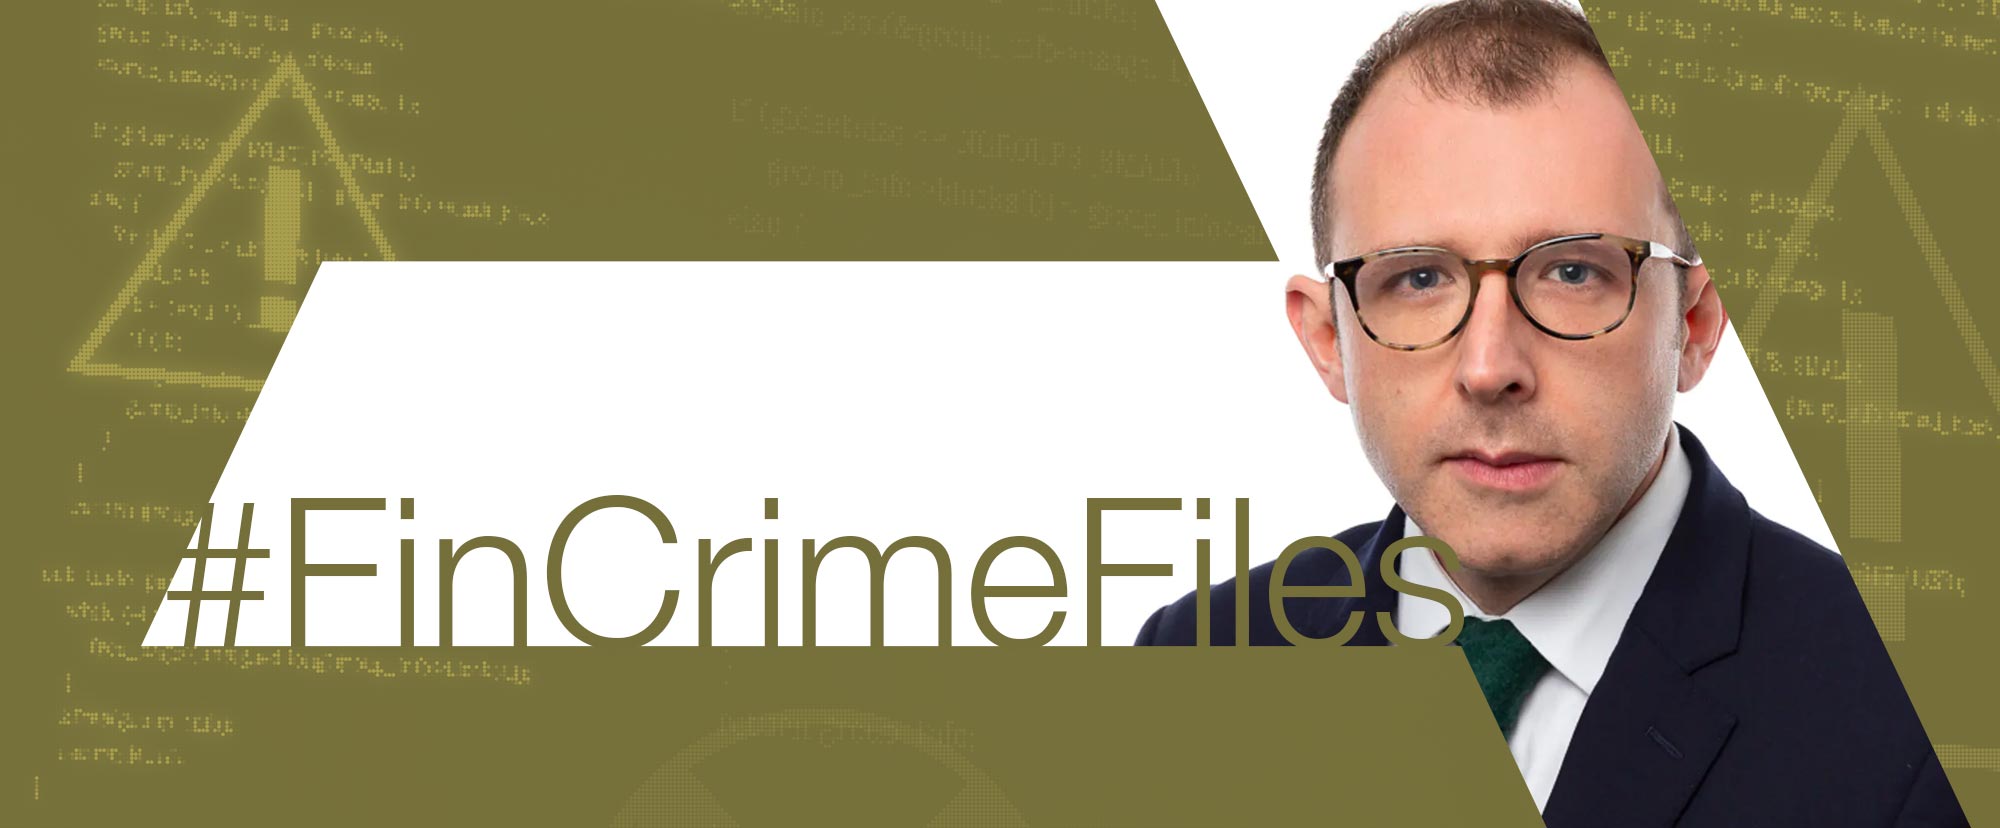 fincrime-files-thom-townsend